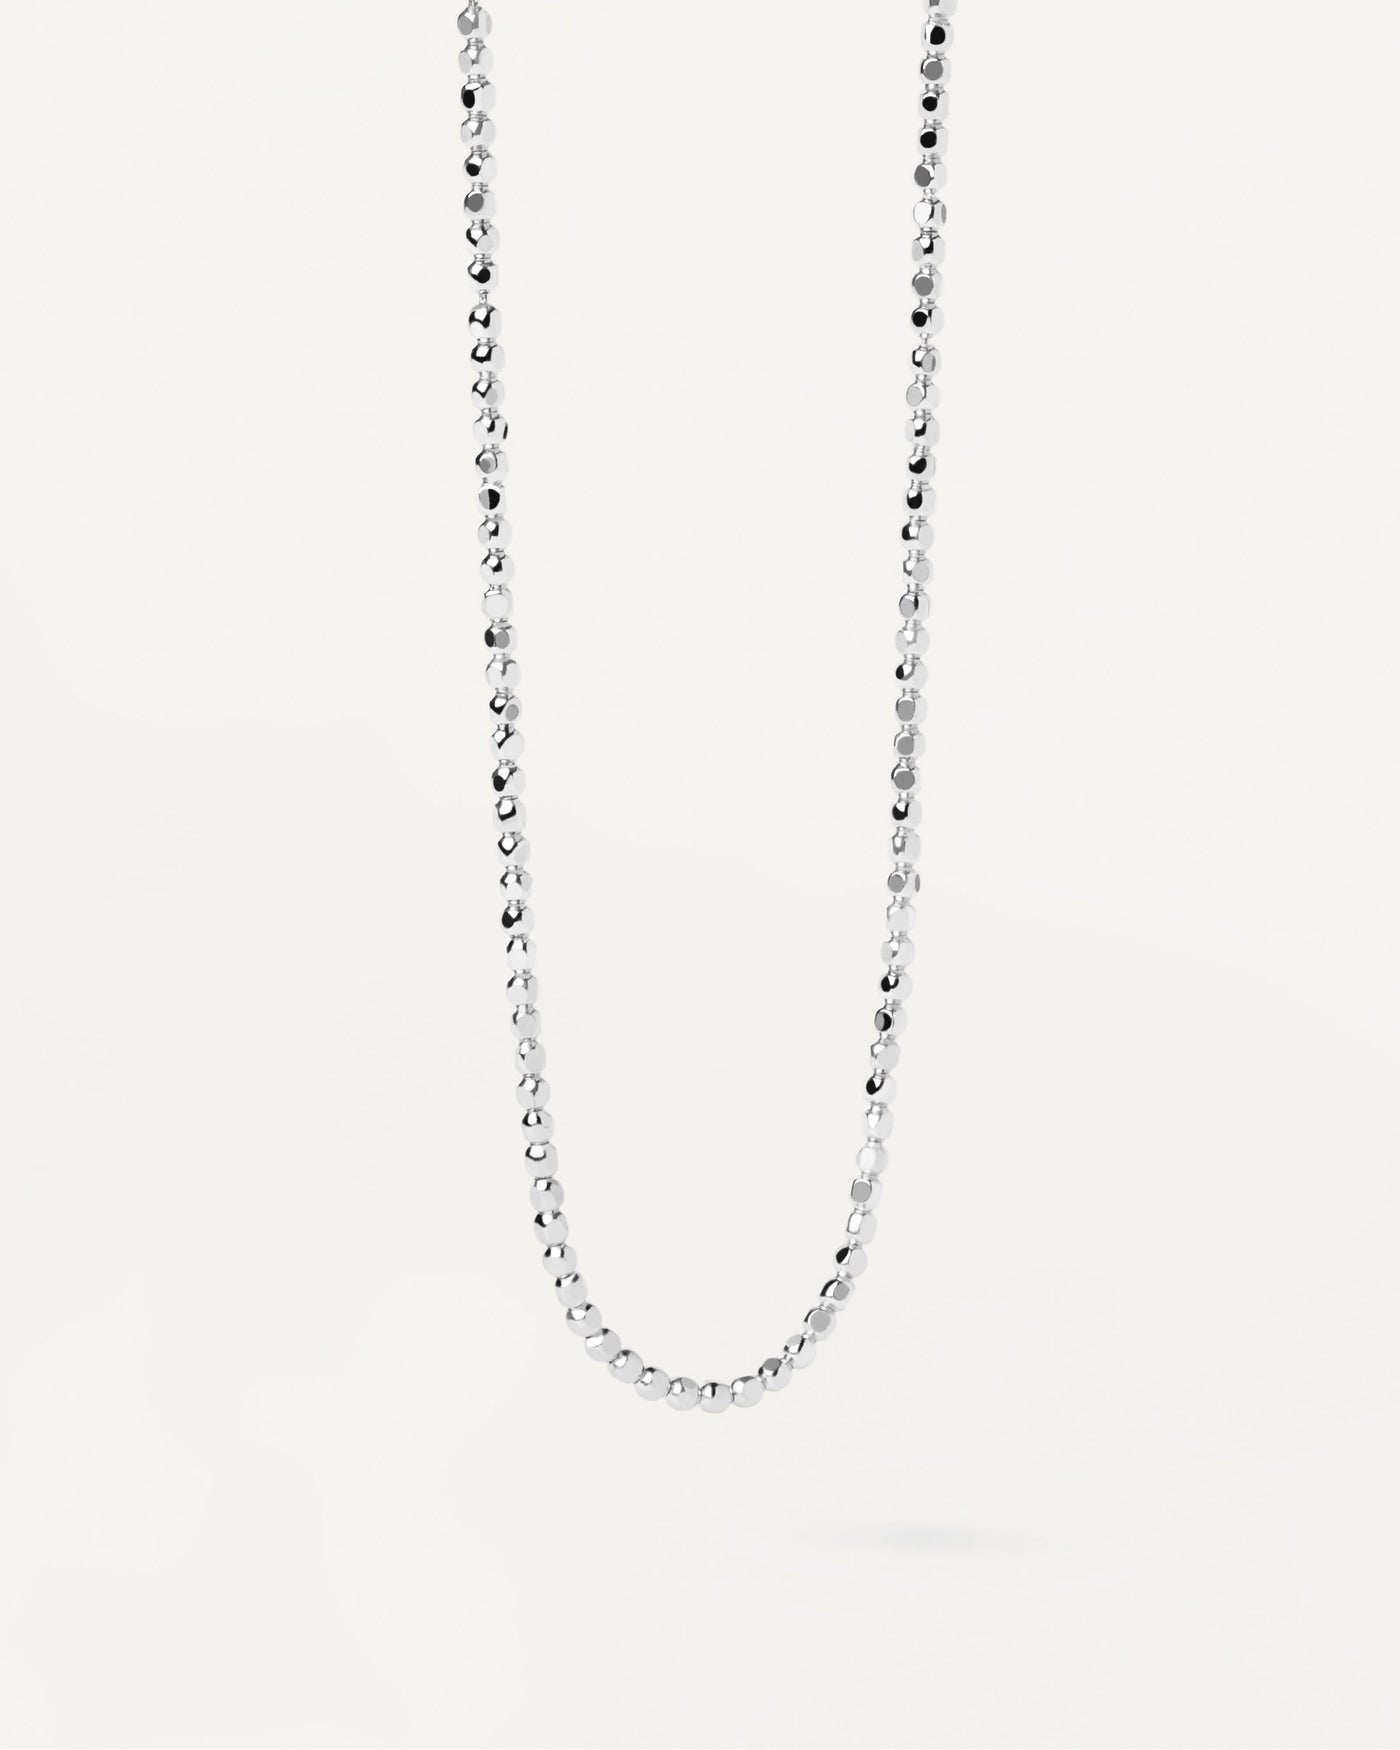 2023 Selection | Marina Silver Chain Necklace. Sterling silver necklace with asymetric bead links. Get the latest arrival from PDPAOLA. Place your order safely and get this Best Seller. Free Shipping.